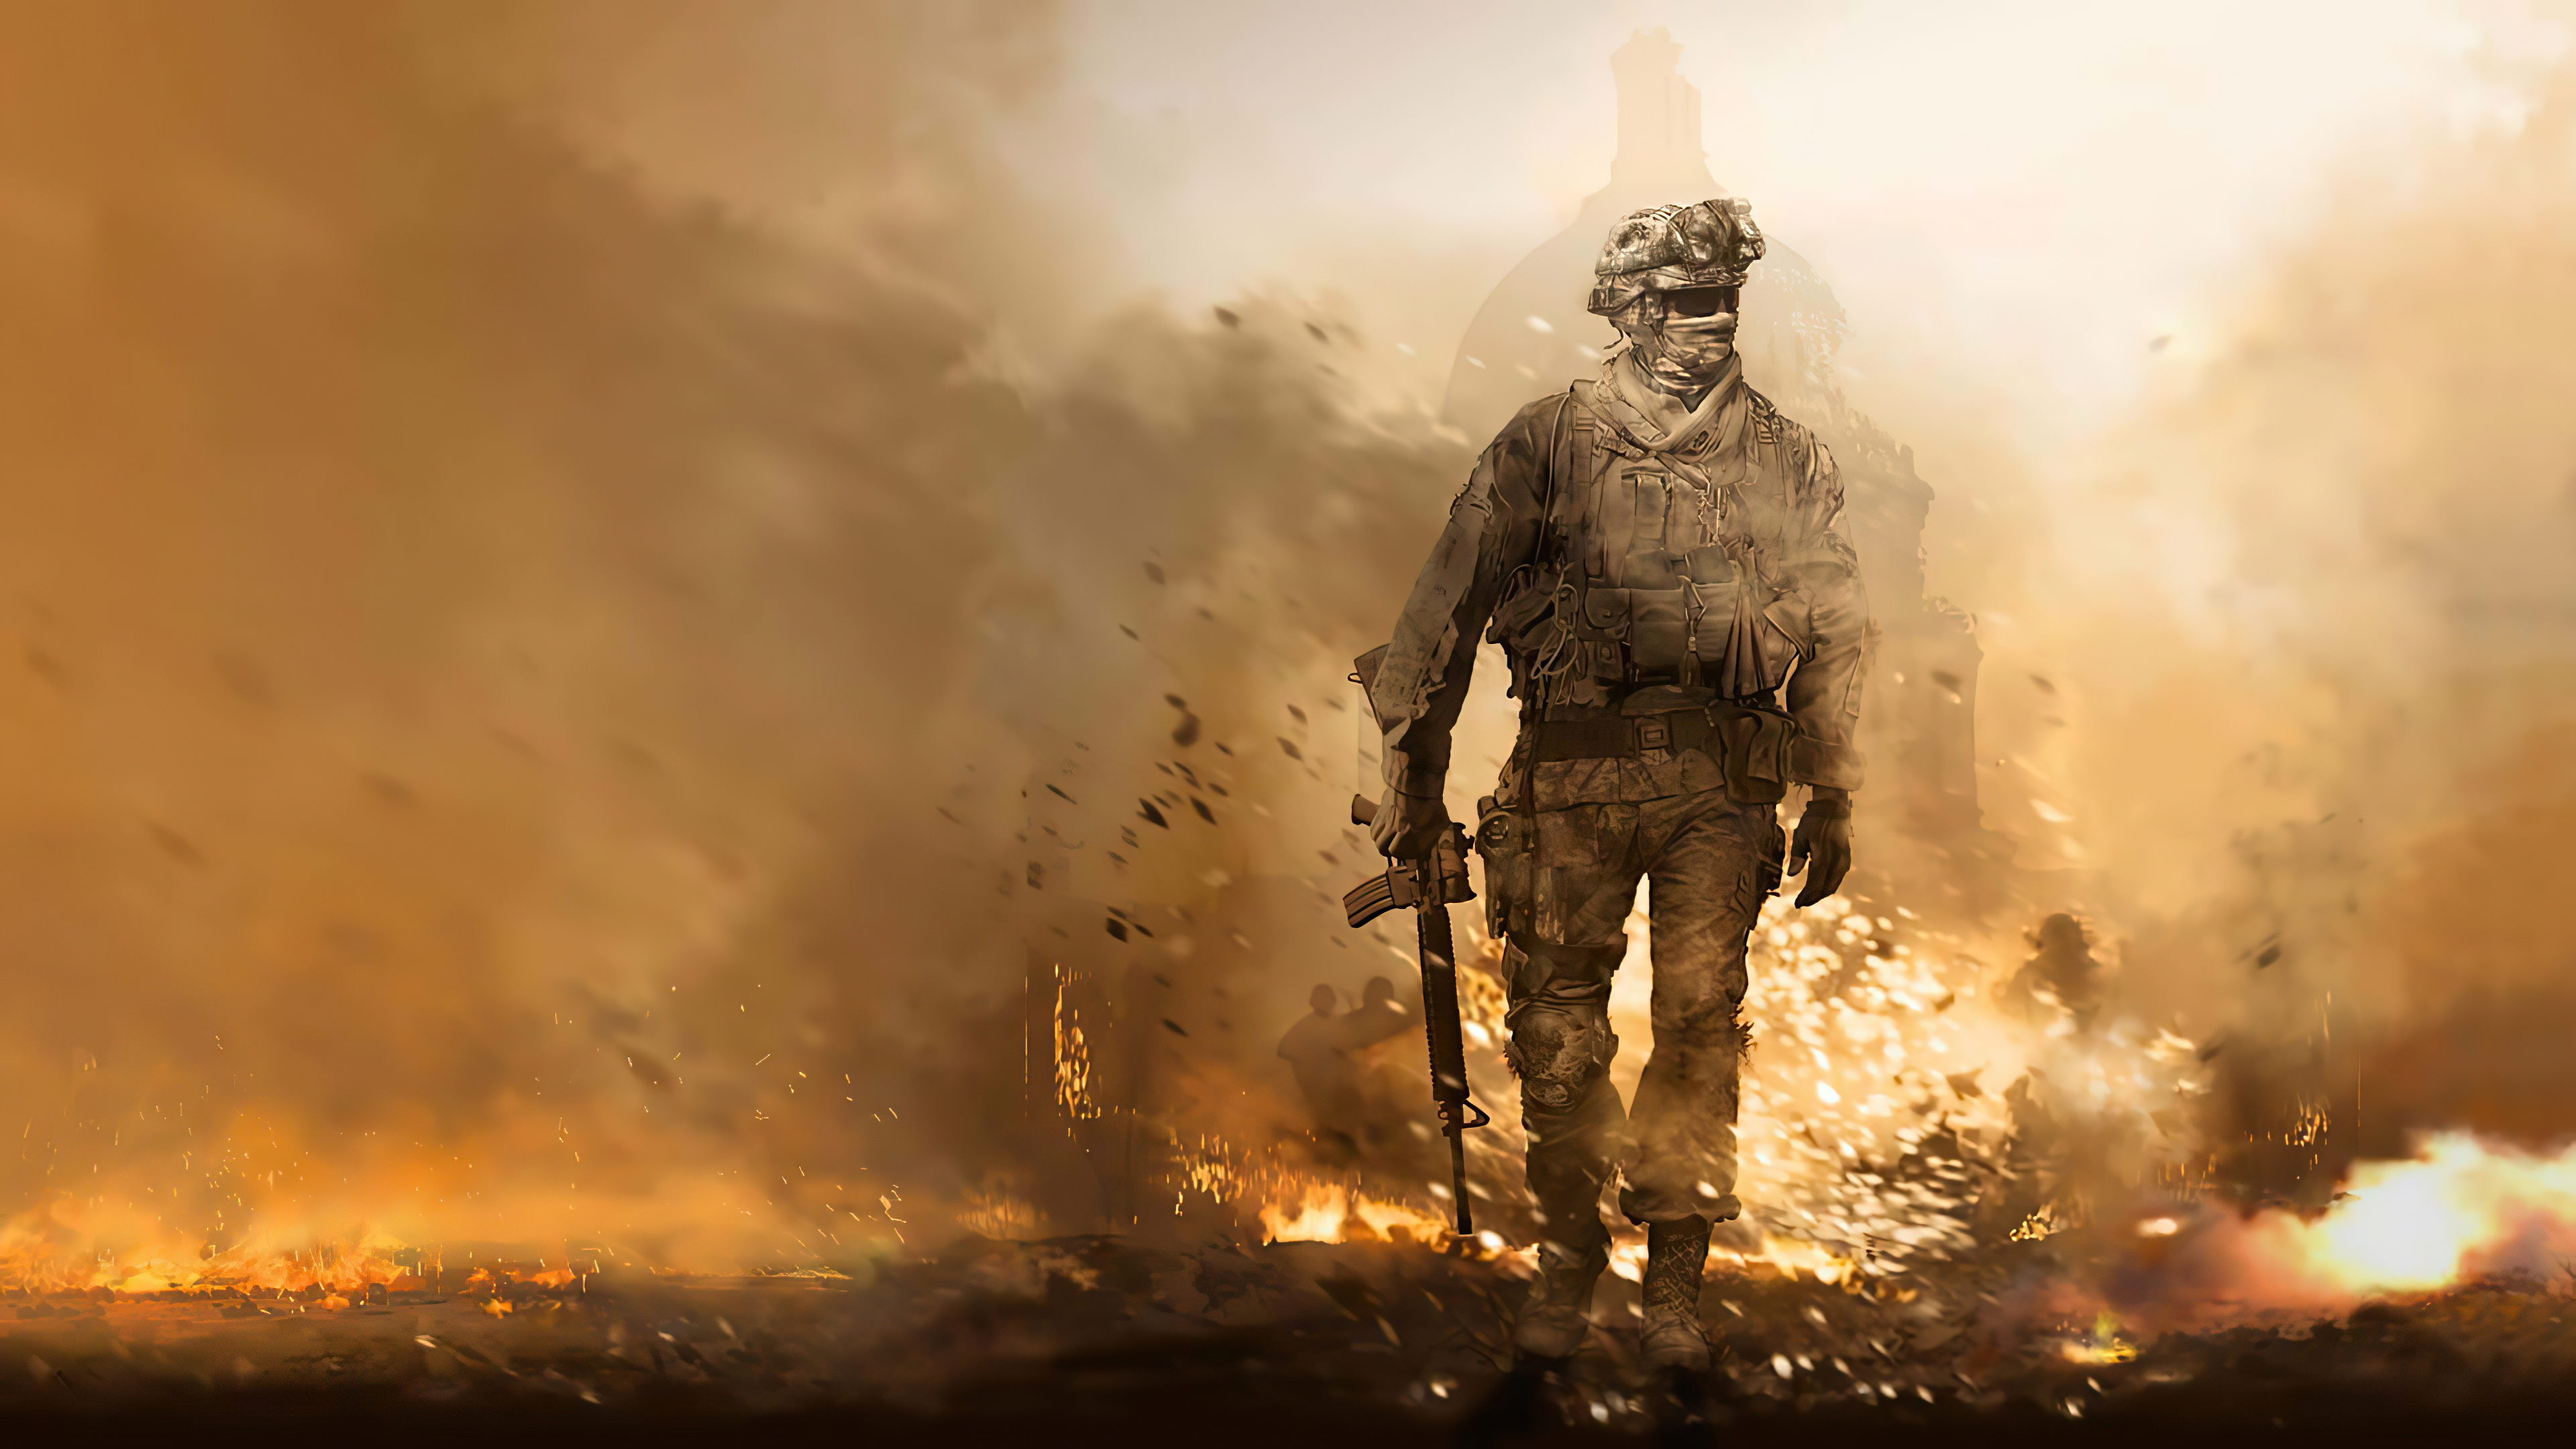 Wallpapers call of duty modern warfare remastered explosion war on the desktop